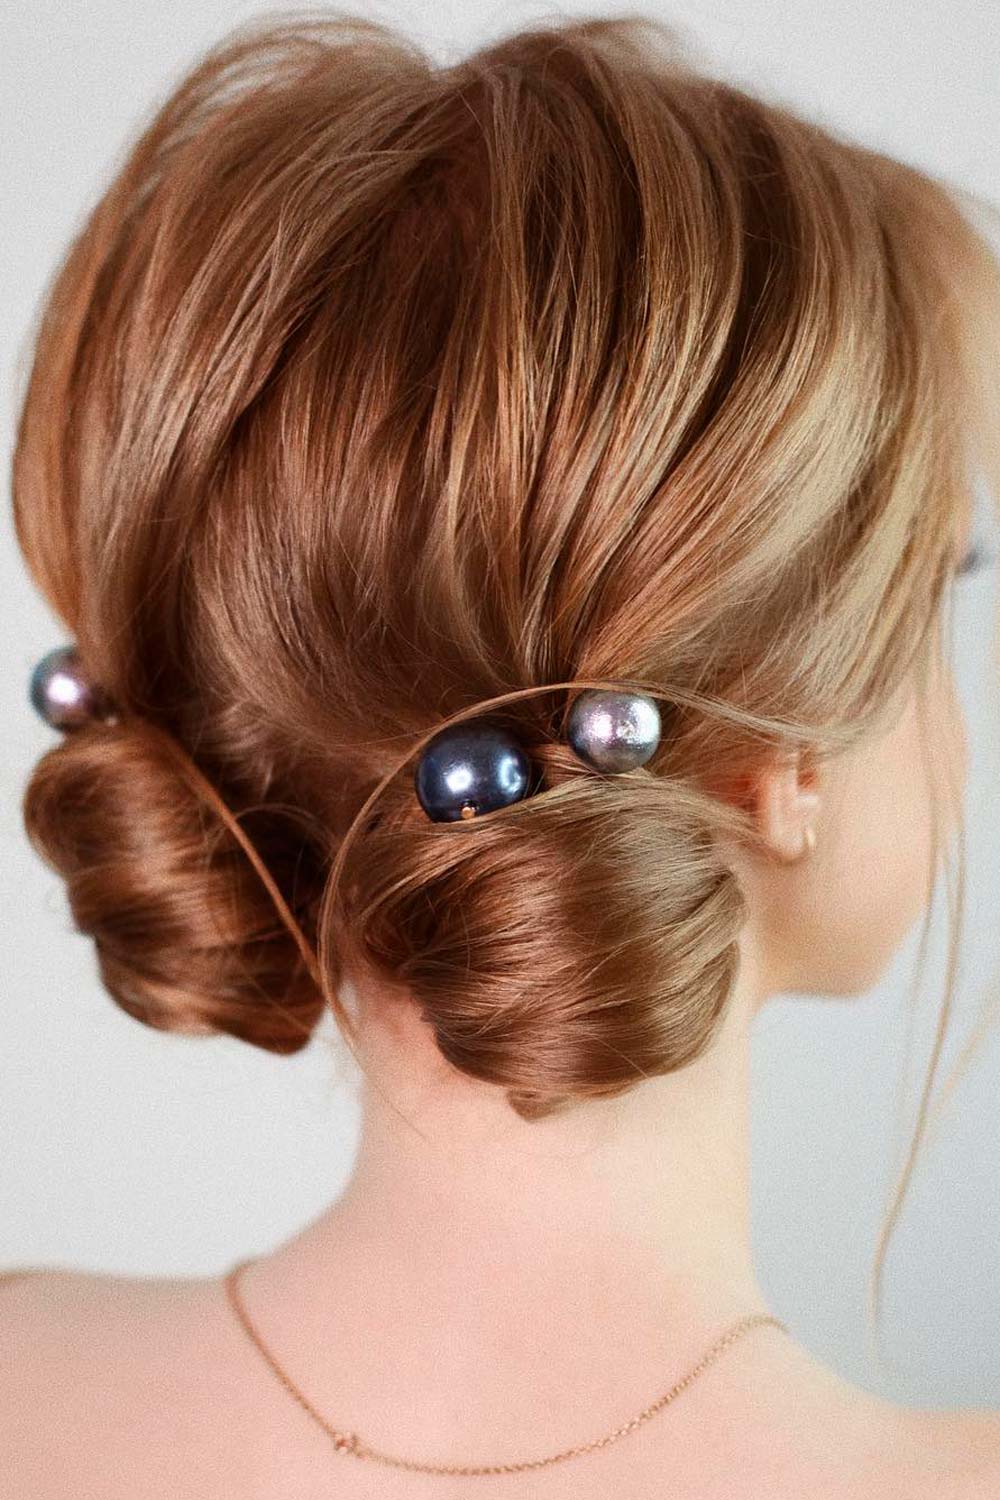 Did you know that baubles may go not only on the Christmas tree but on your hair as well?